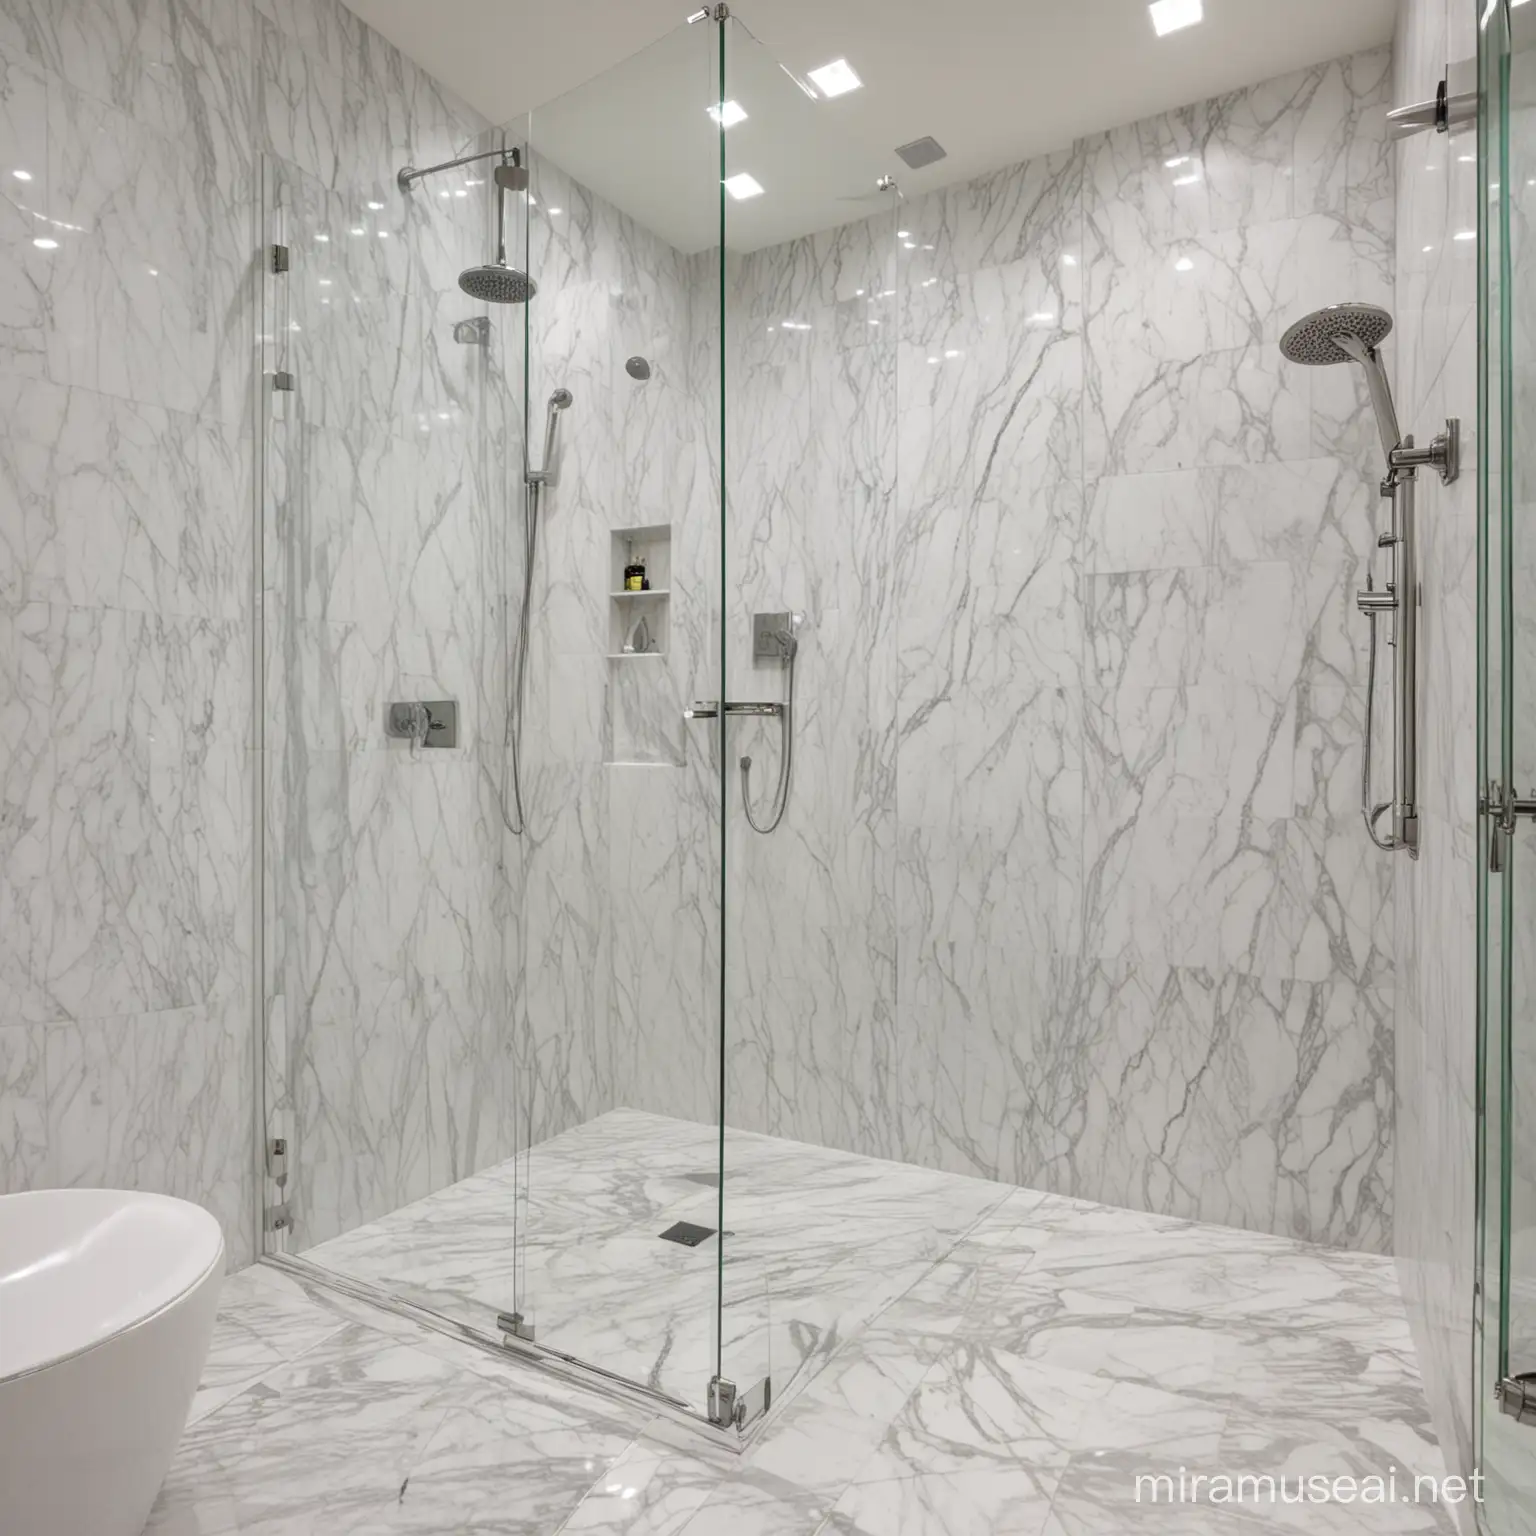 can you make a shower wall using a full slab of carerra marble like for shower wall panels with a full continous veining of marble from ceiling to floor
